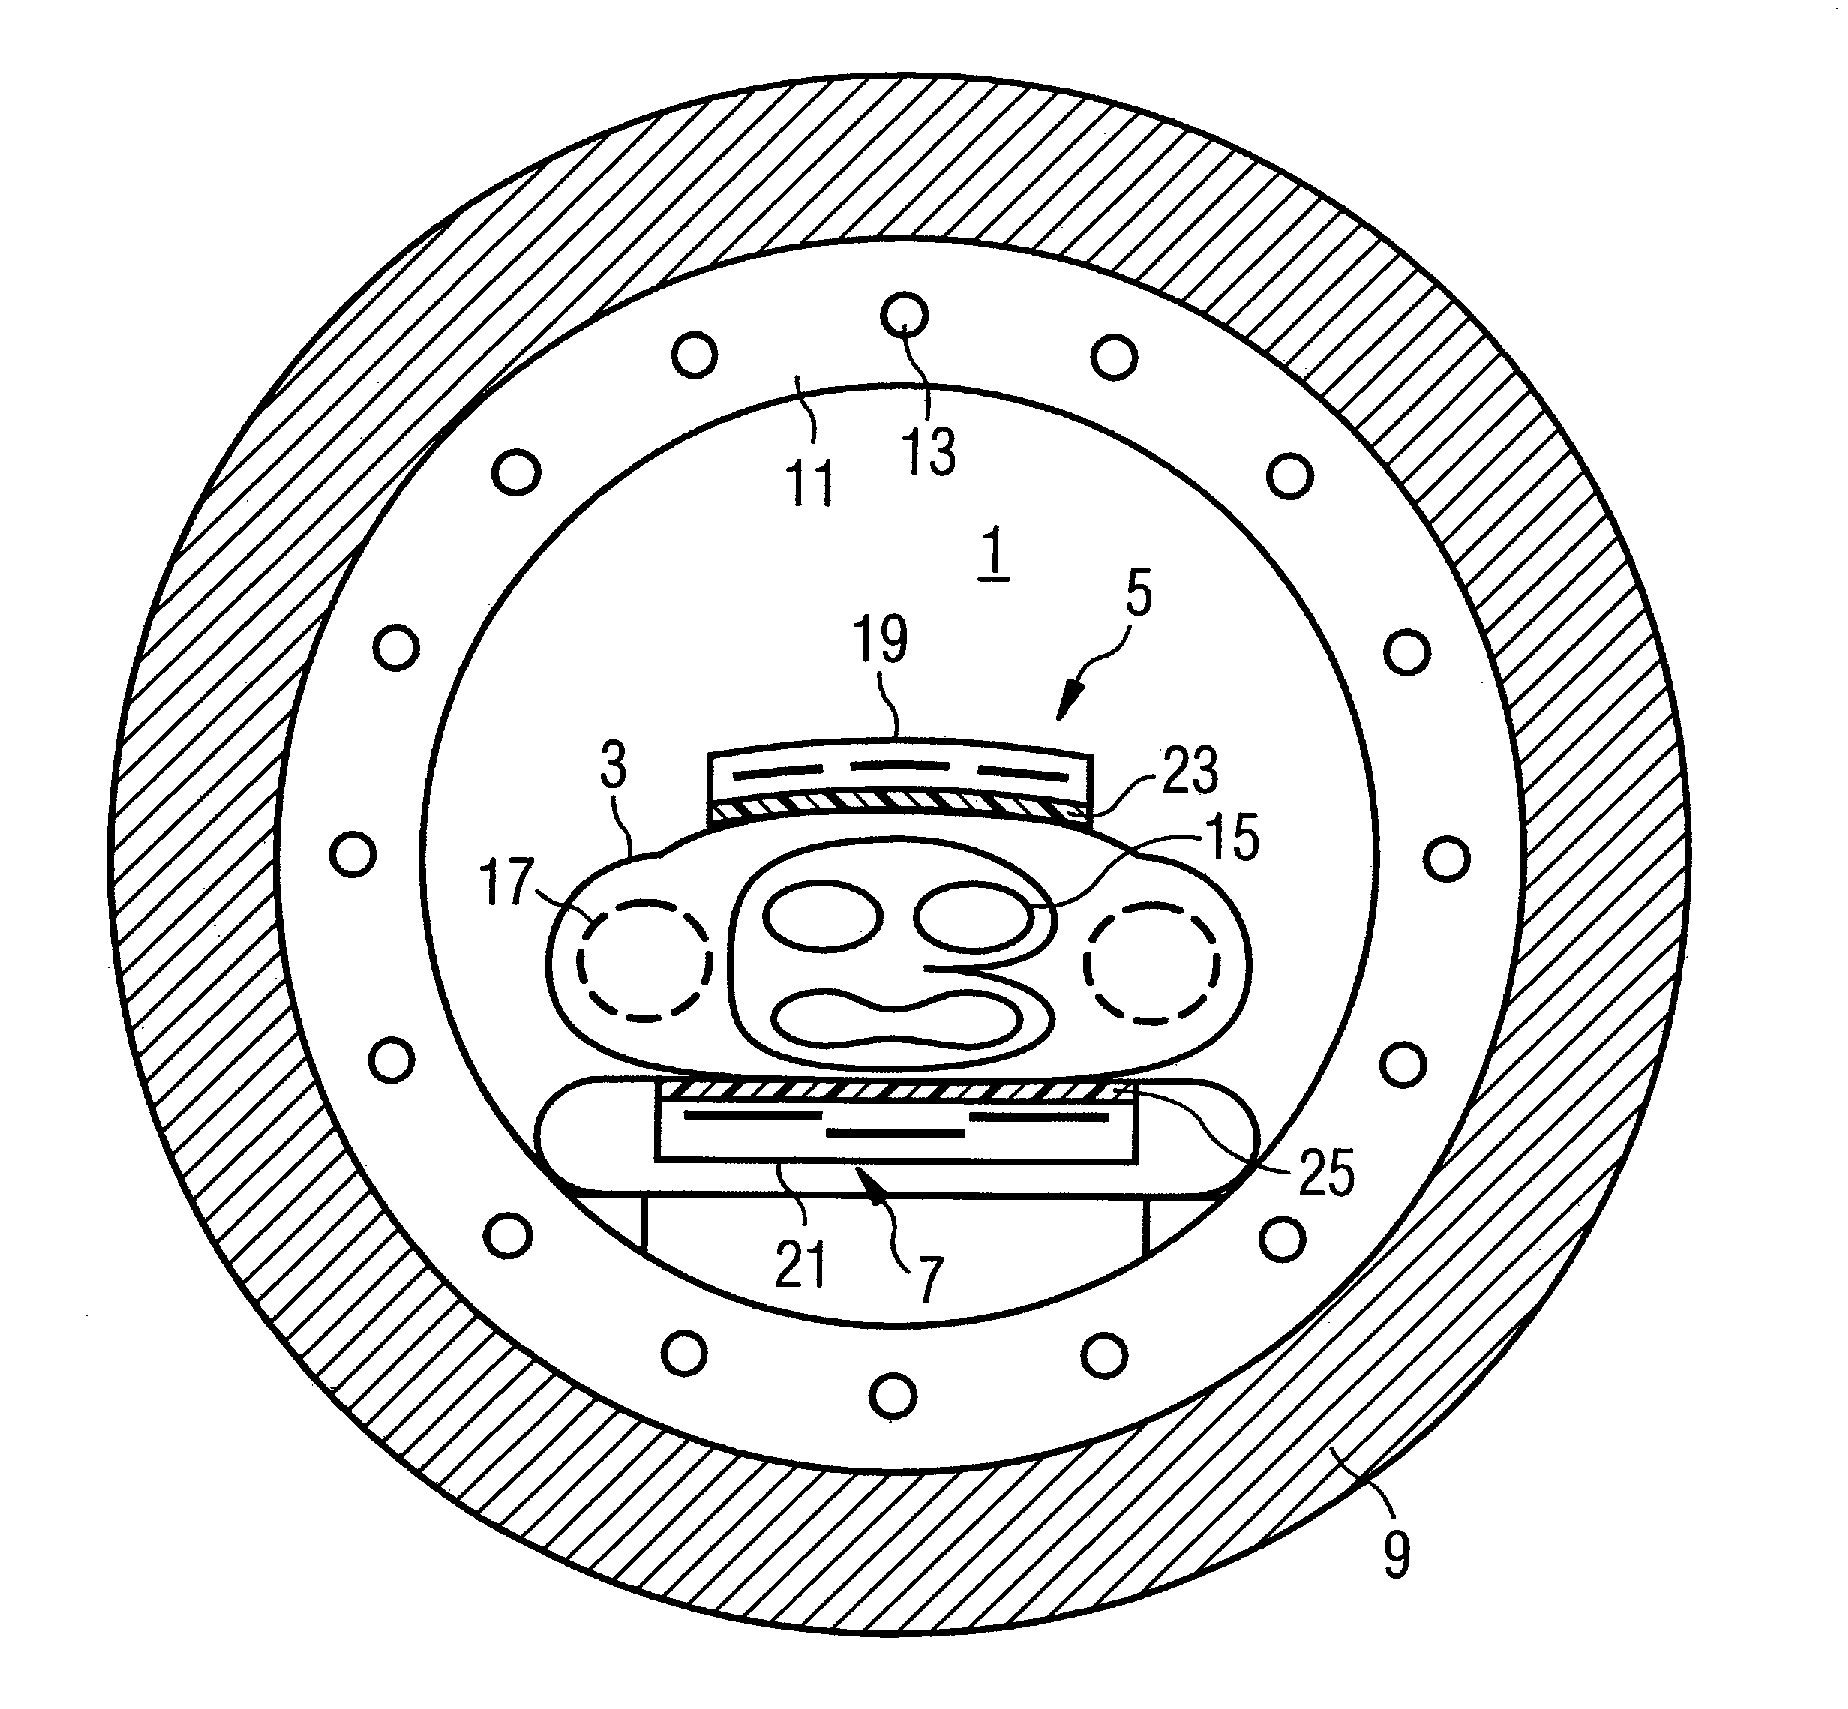 Arrangement for radiation of a radio-frequency field